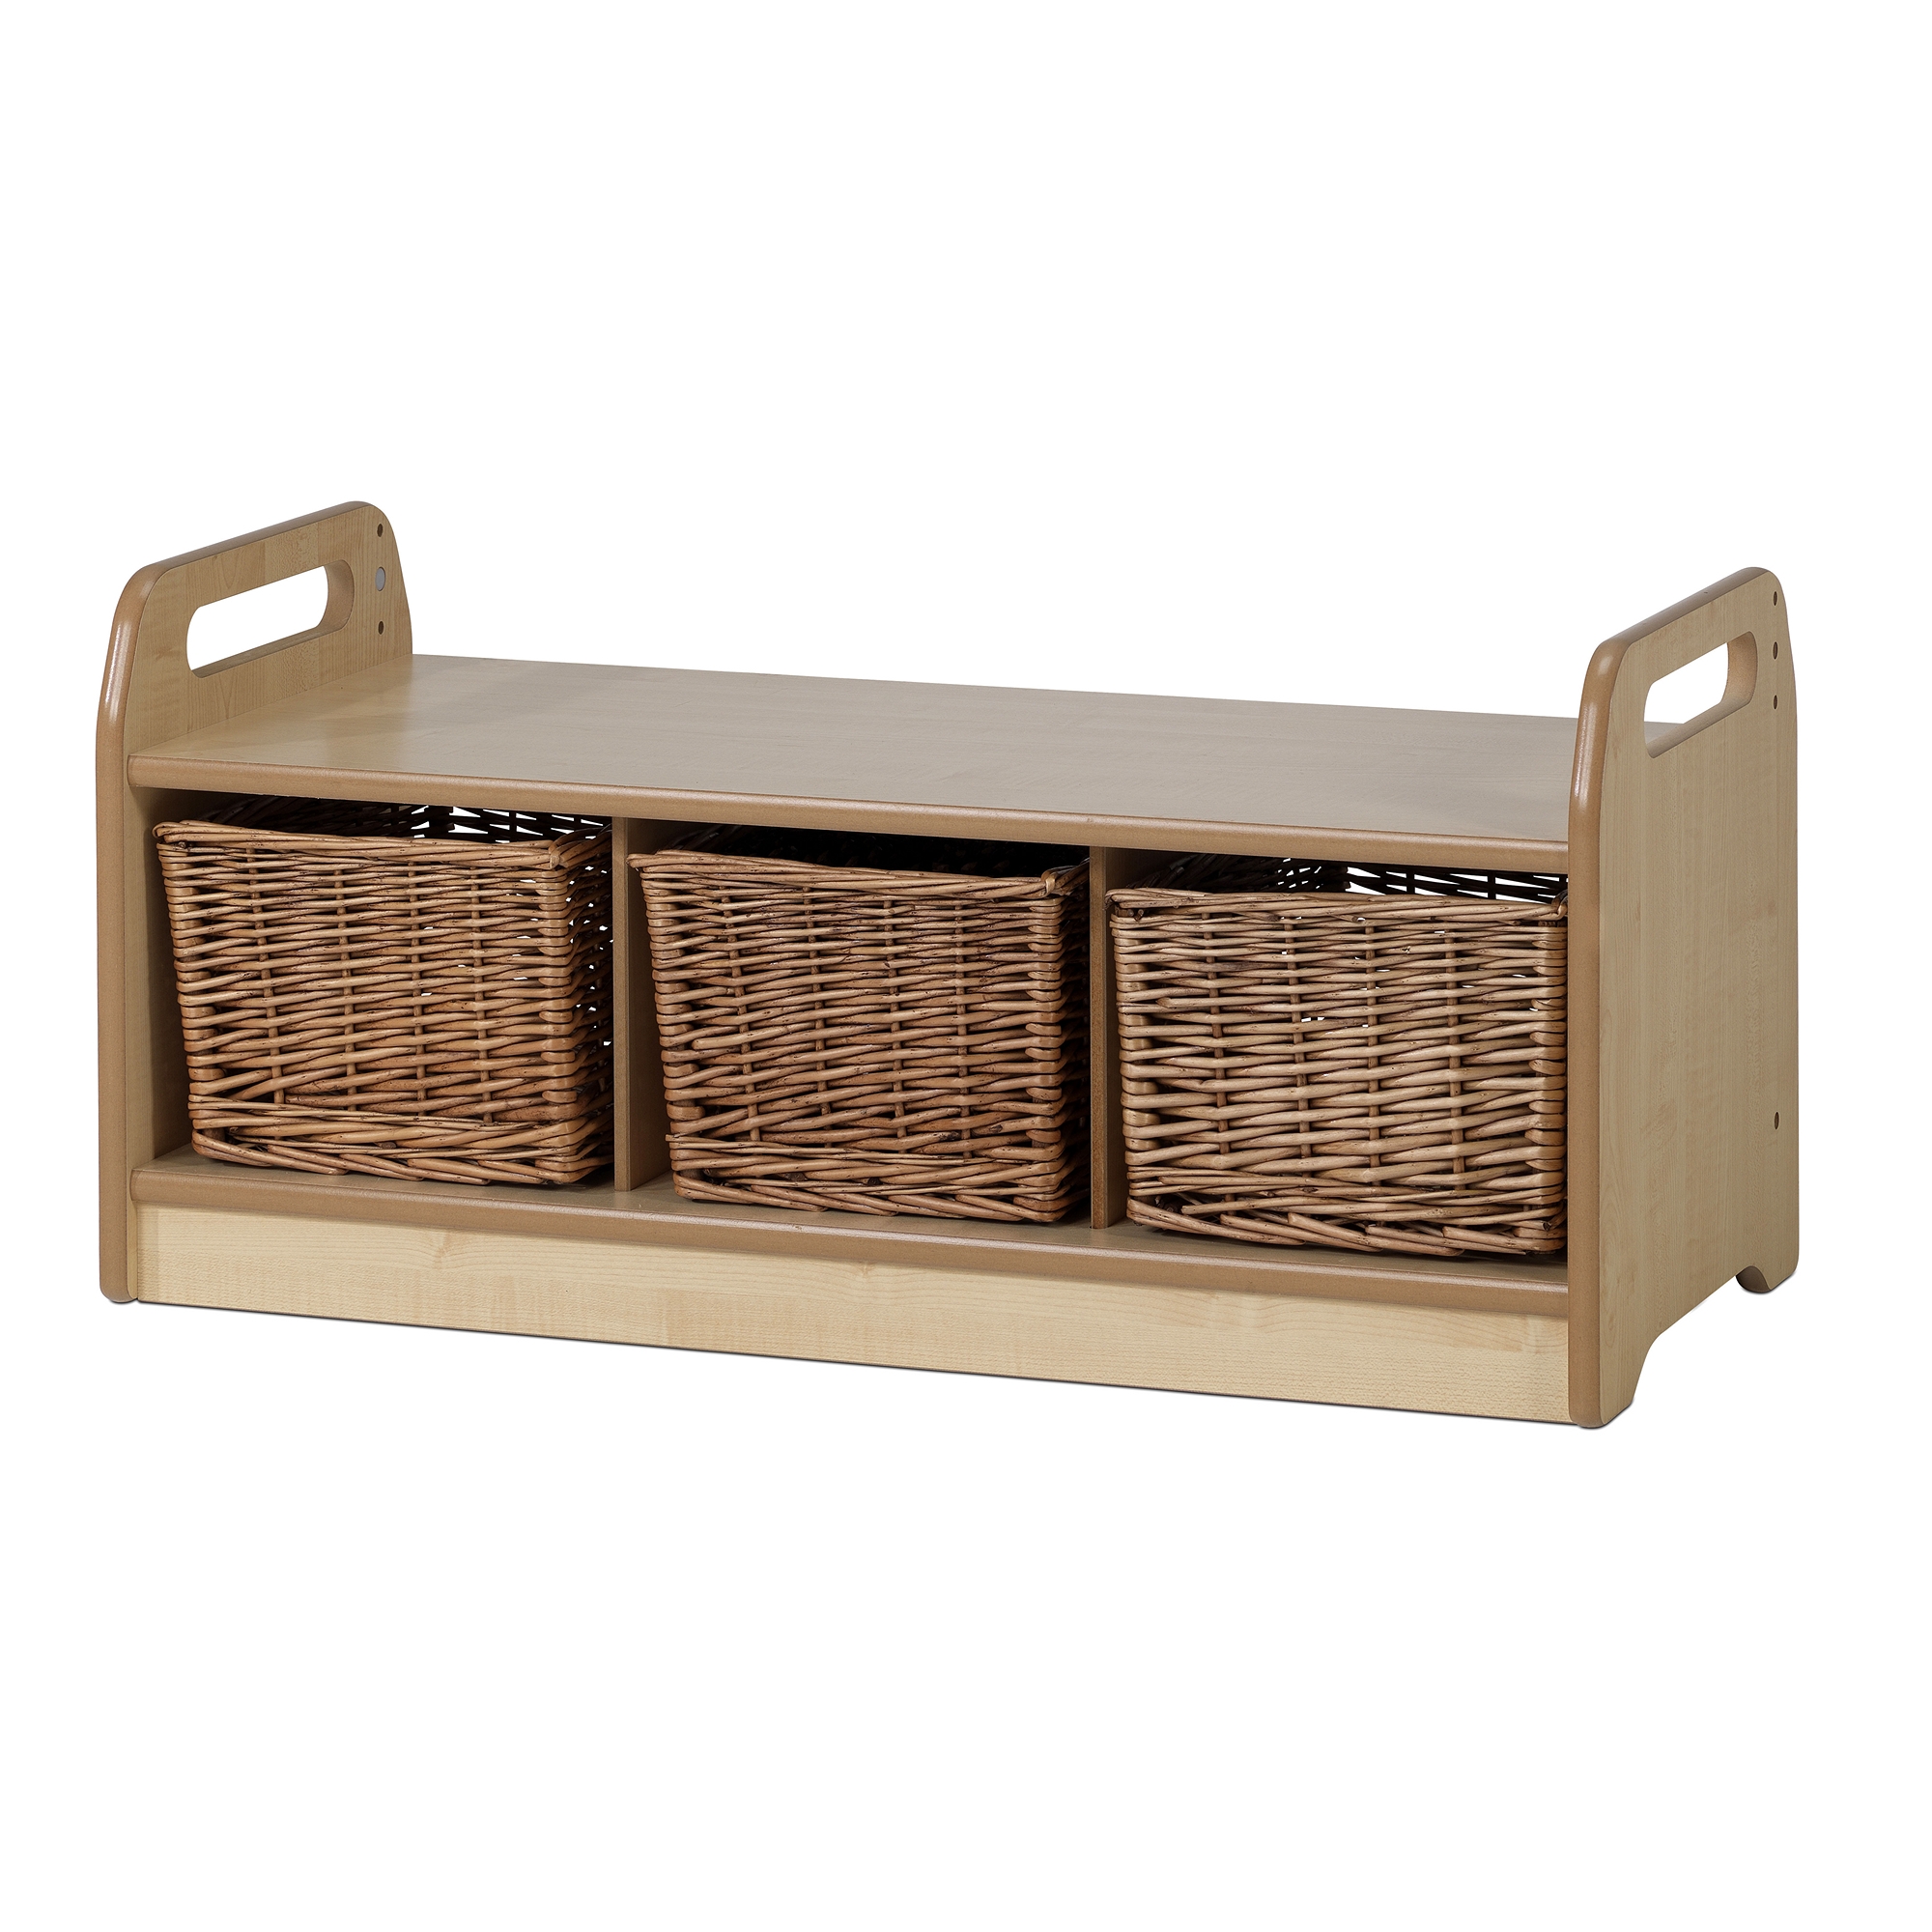 Playscapes Low Level Storage Bench with Wicker Baskets